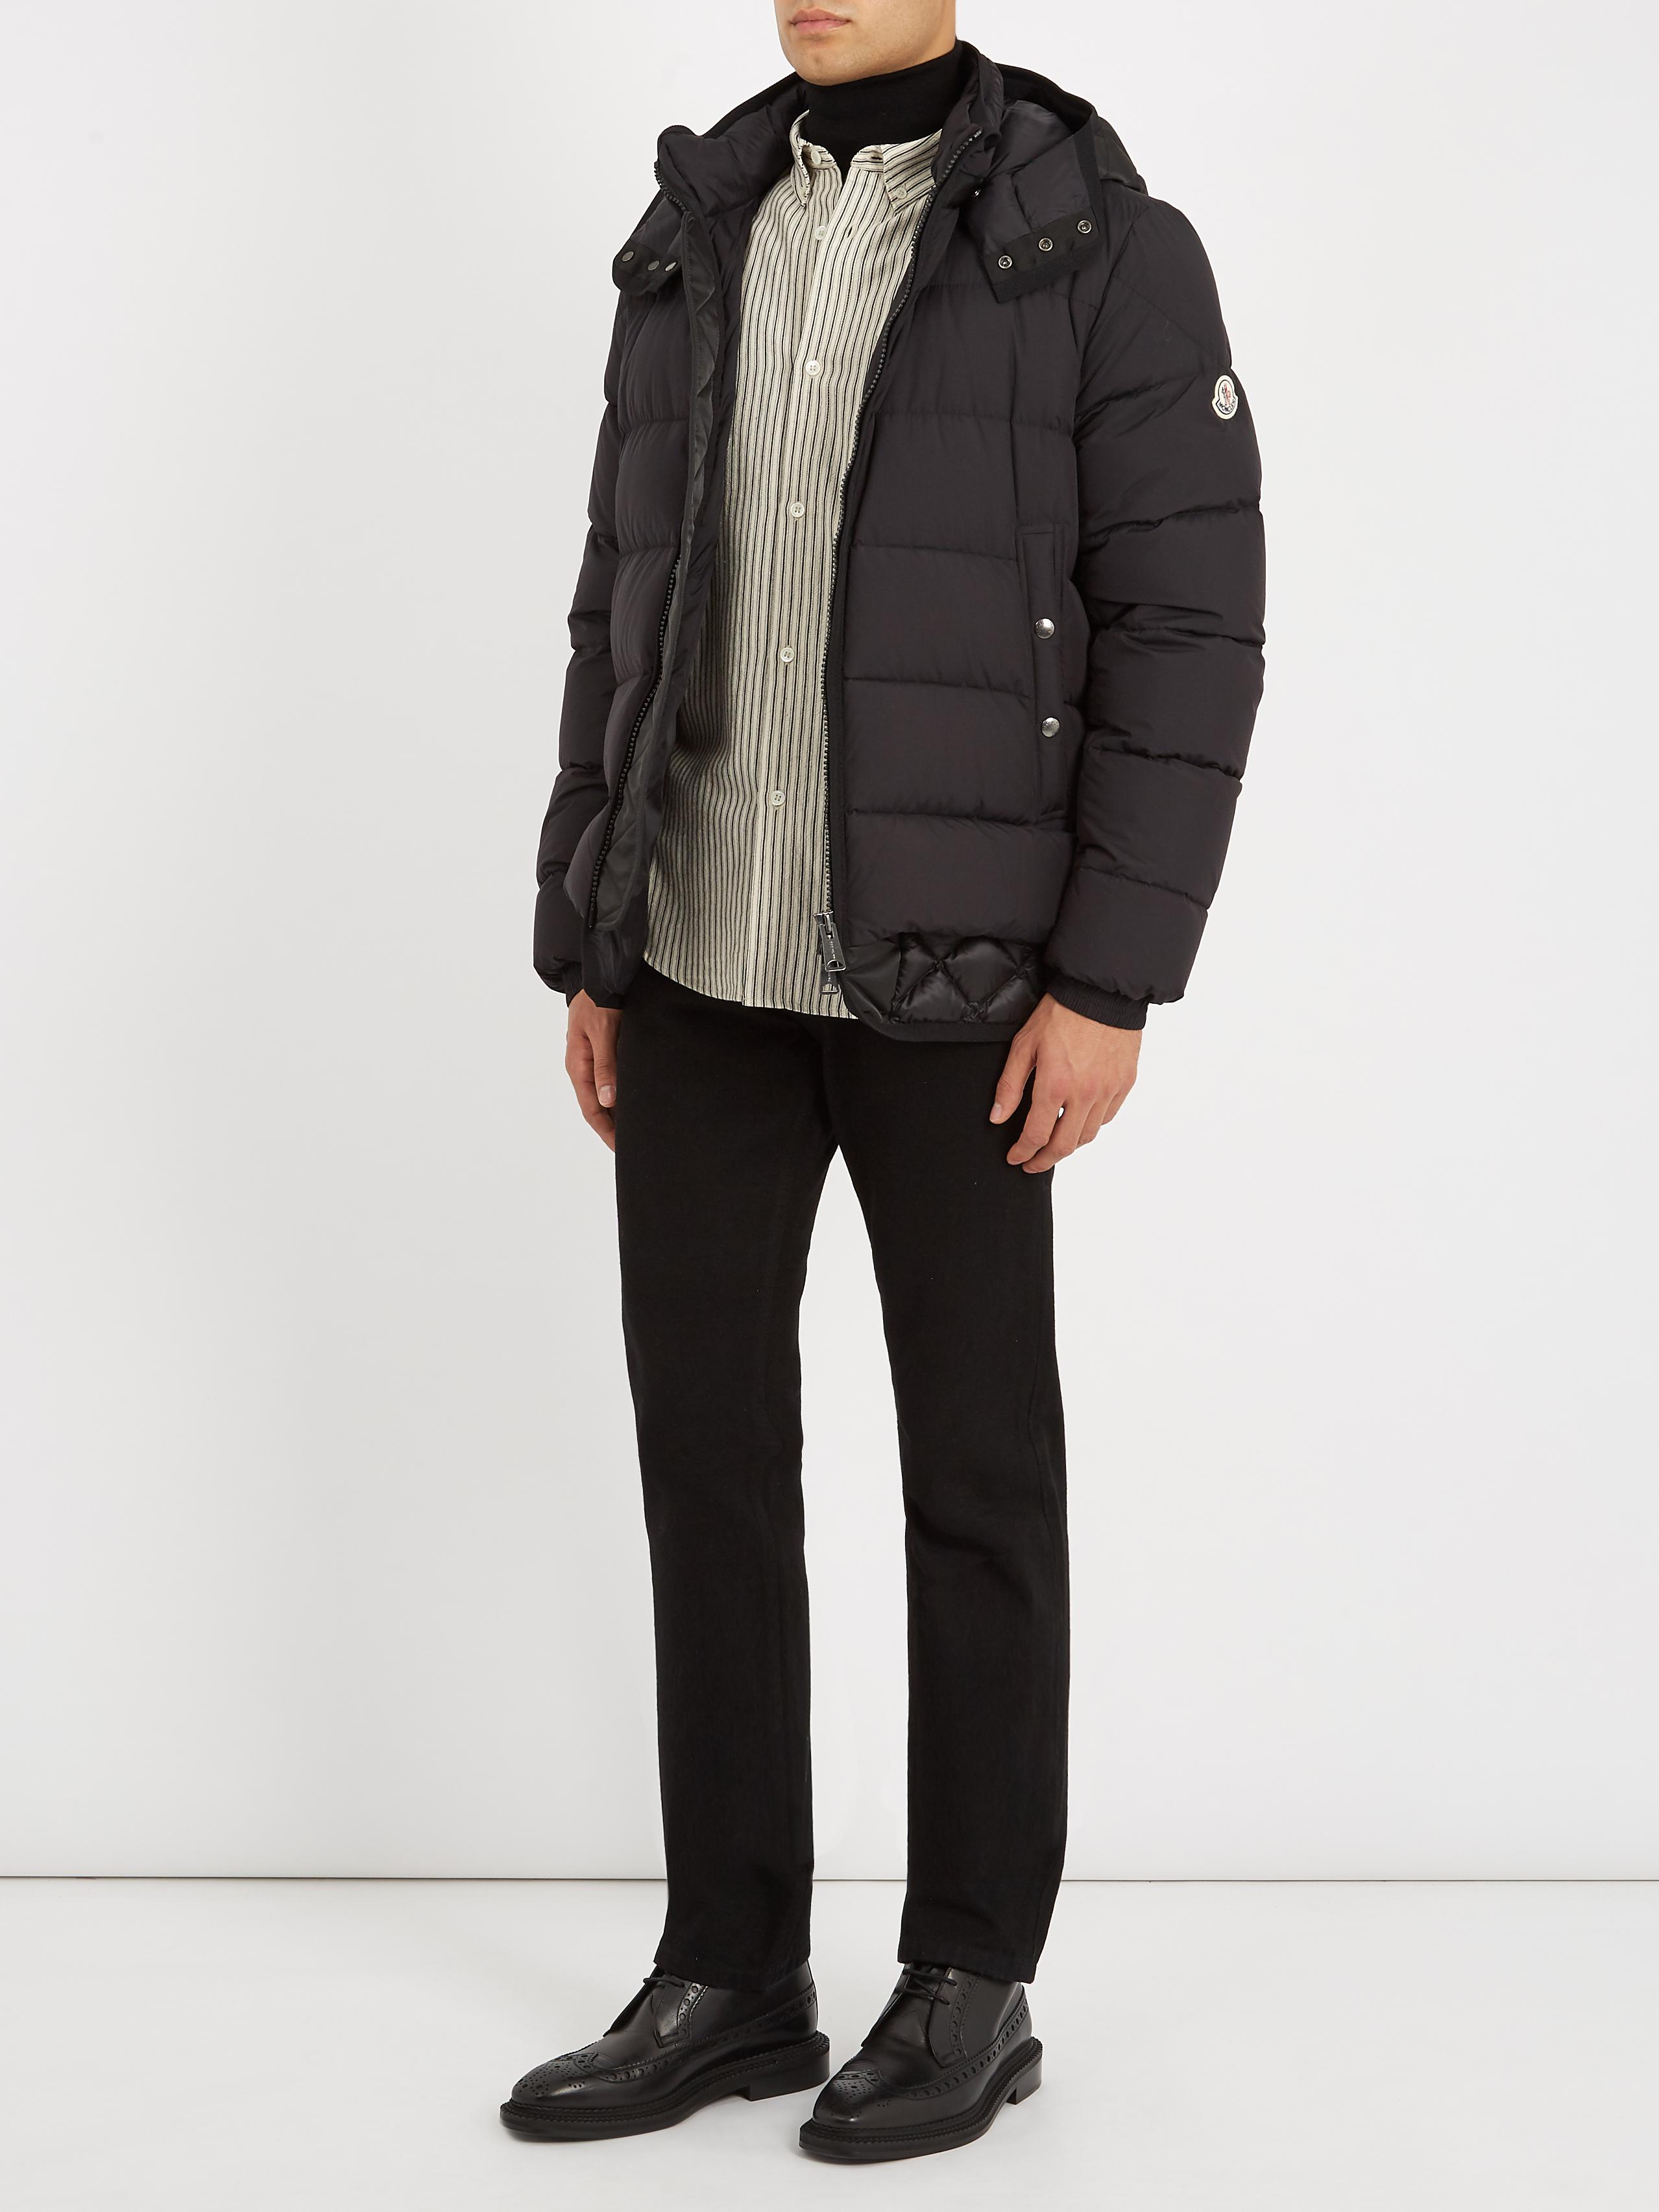 Moncler Synthetic Tanguy Quilted Down Jacket in Black for Men - Lyst